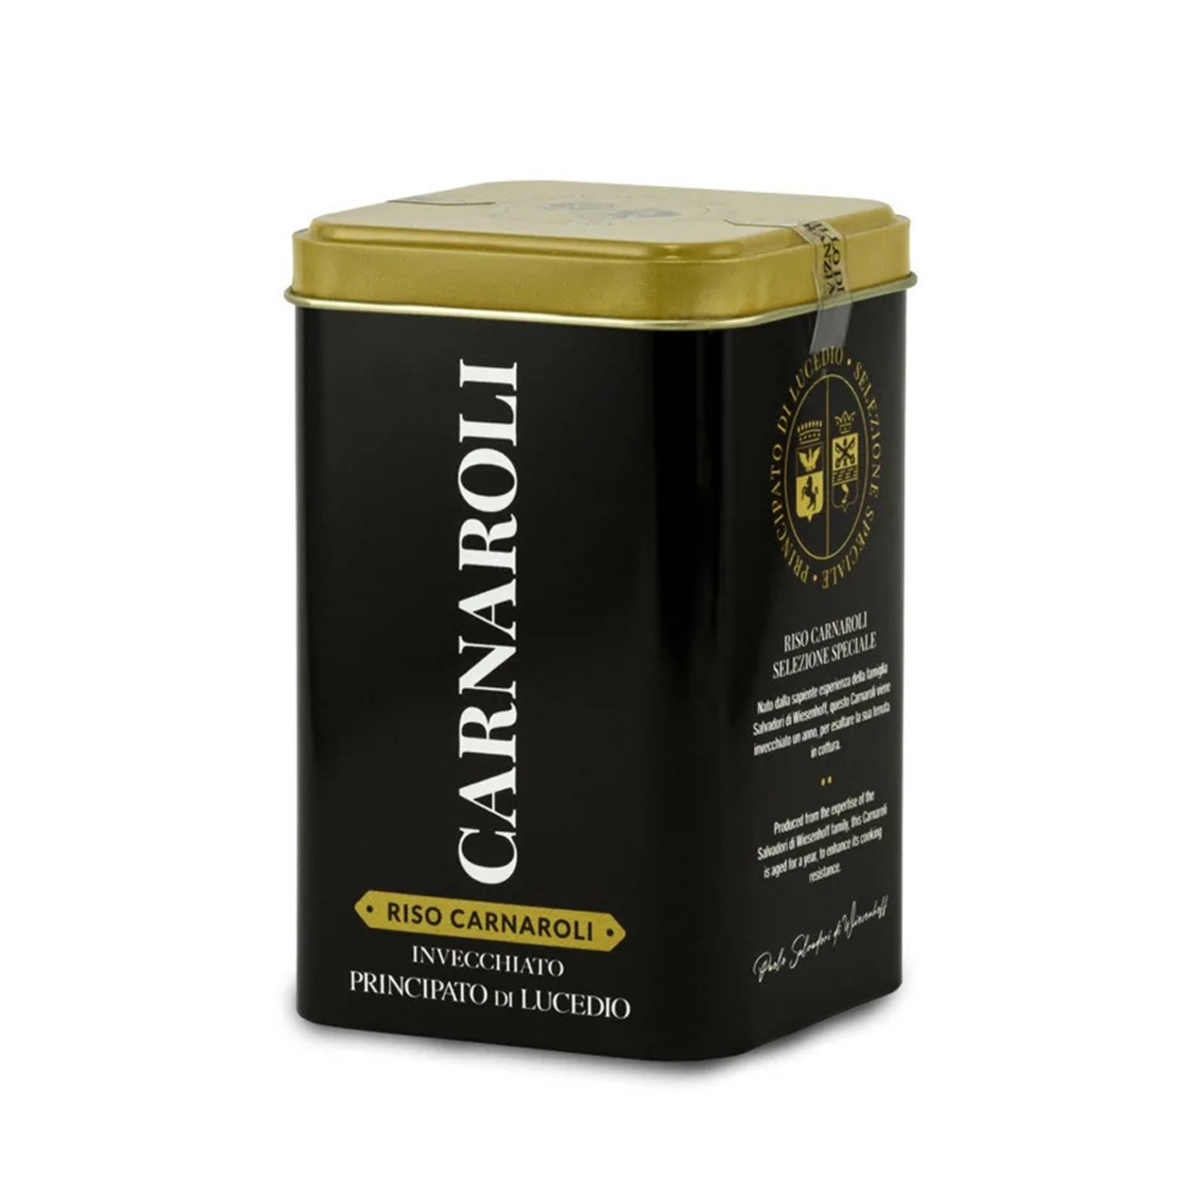 photo Aged Carnaroli Rice - 500 g - Packaged in Protective Atmosphere and Tin Box